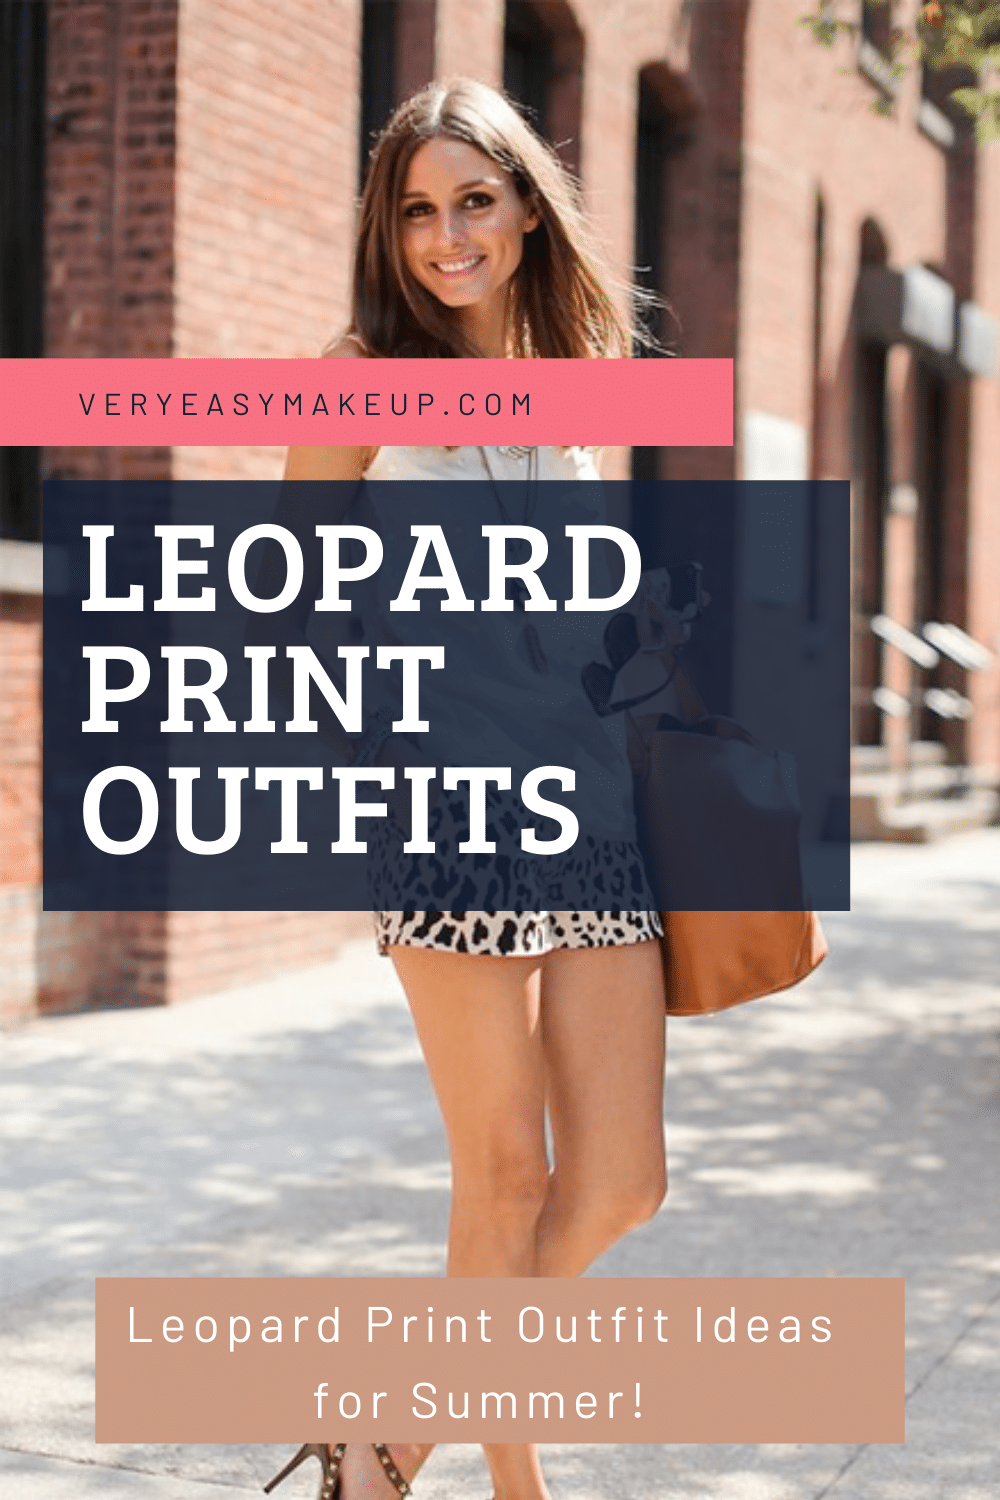 Leopard Print Outfit Ideas for Summer by Very Easy Makeup